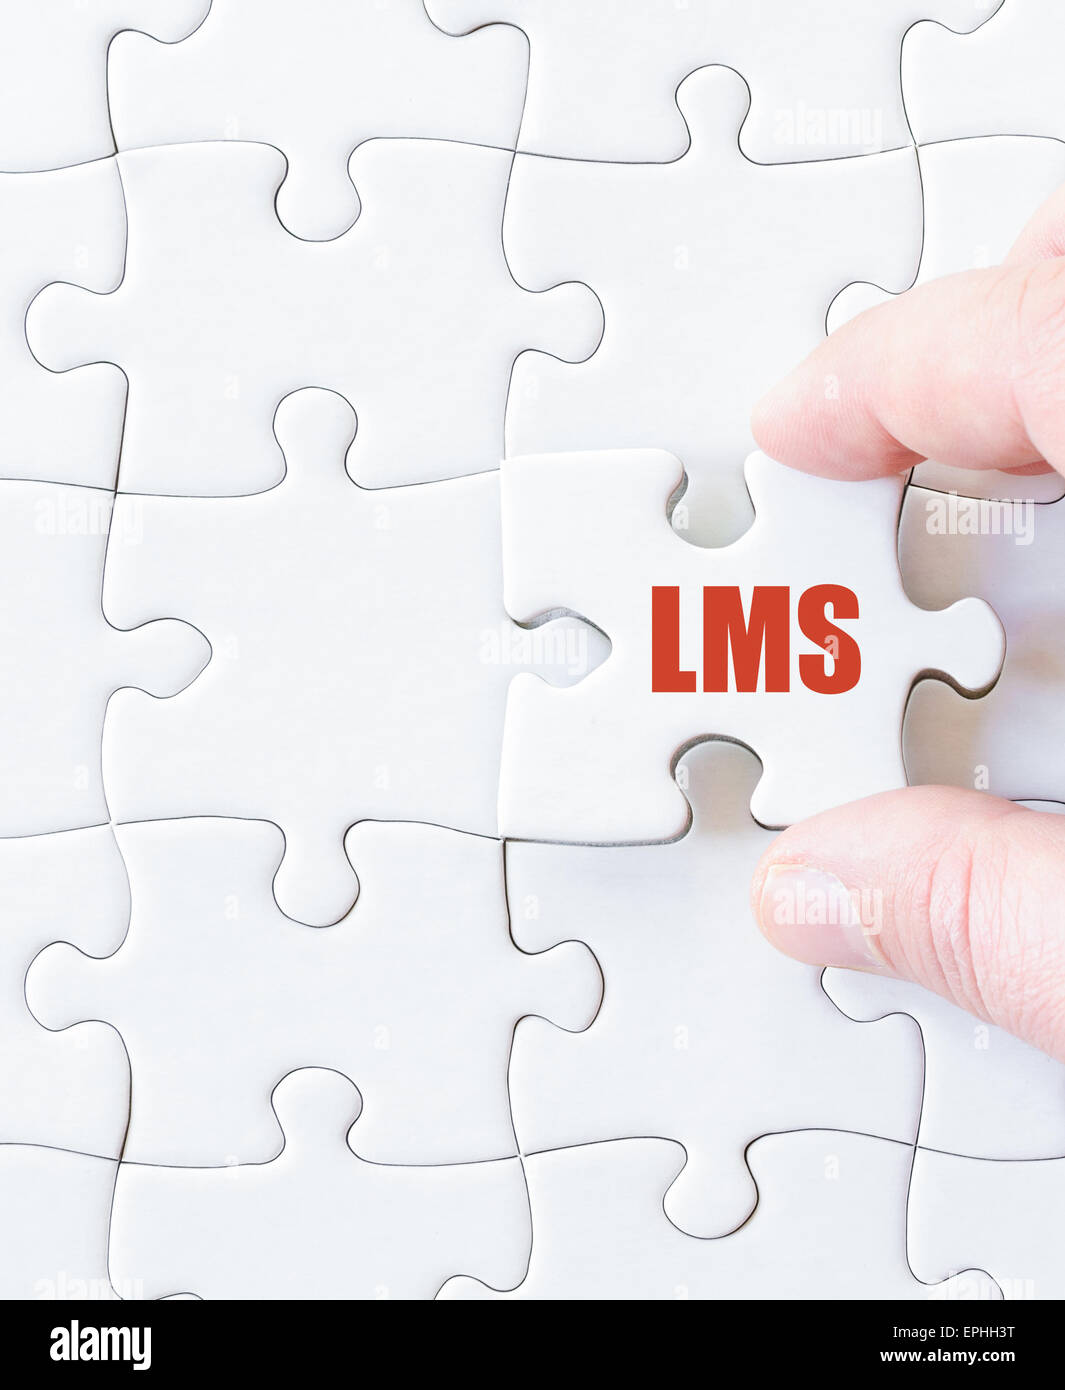 Missing jigsaw puzzle piece with text LMS.as Learning Management System. Business concept image for completing the puzzle. Stock Photo